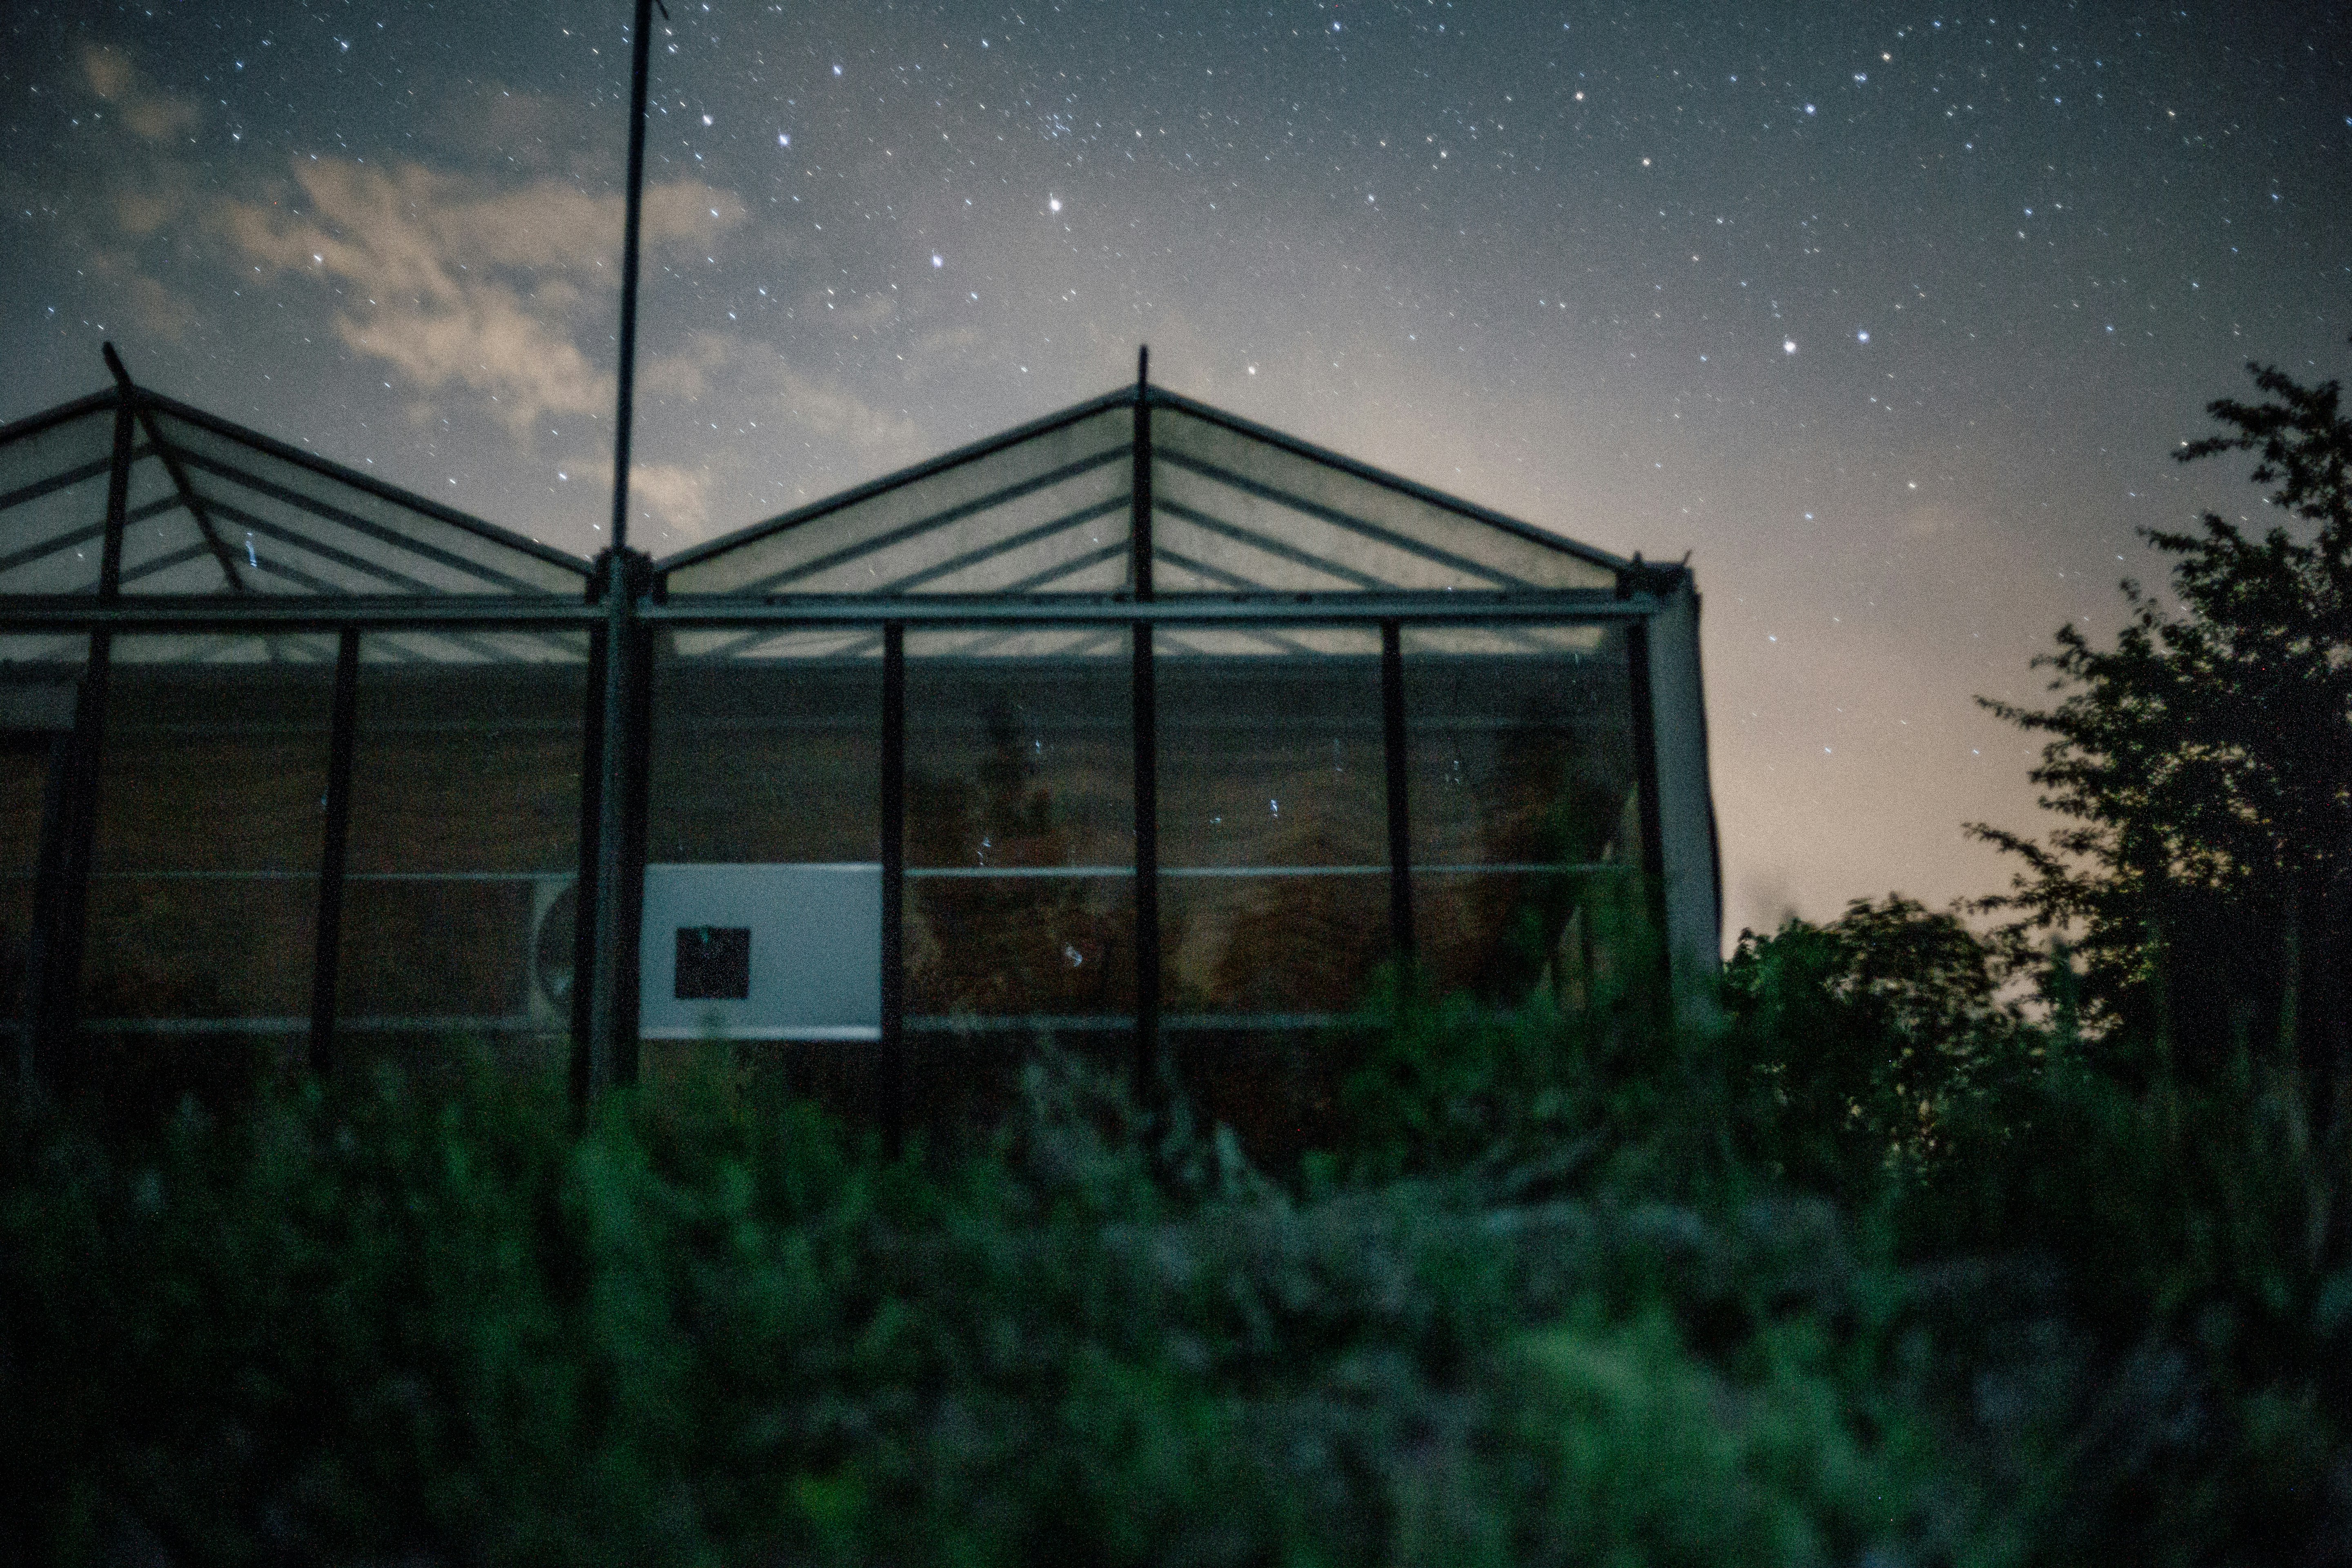 A surreal picture of a greenhouse at night in bavaria!